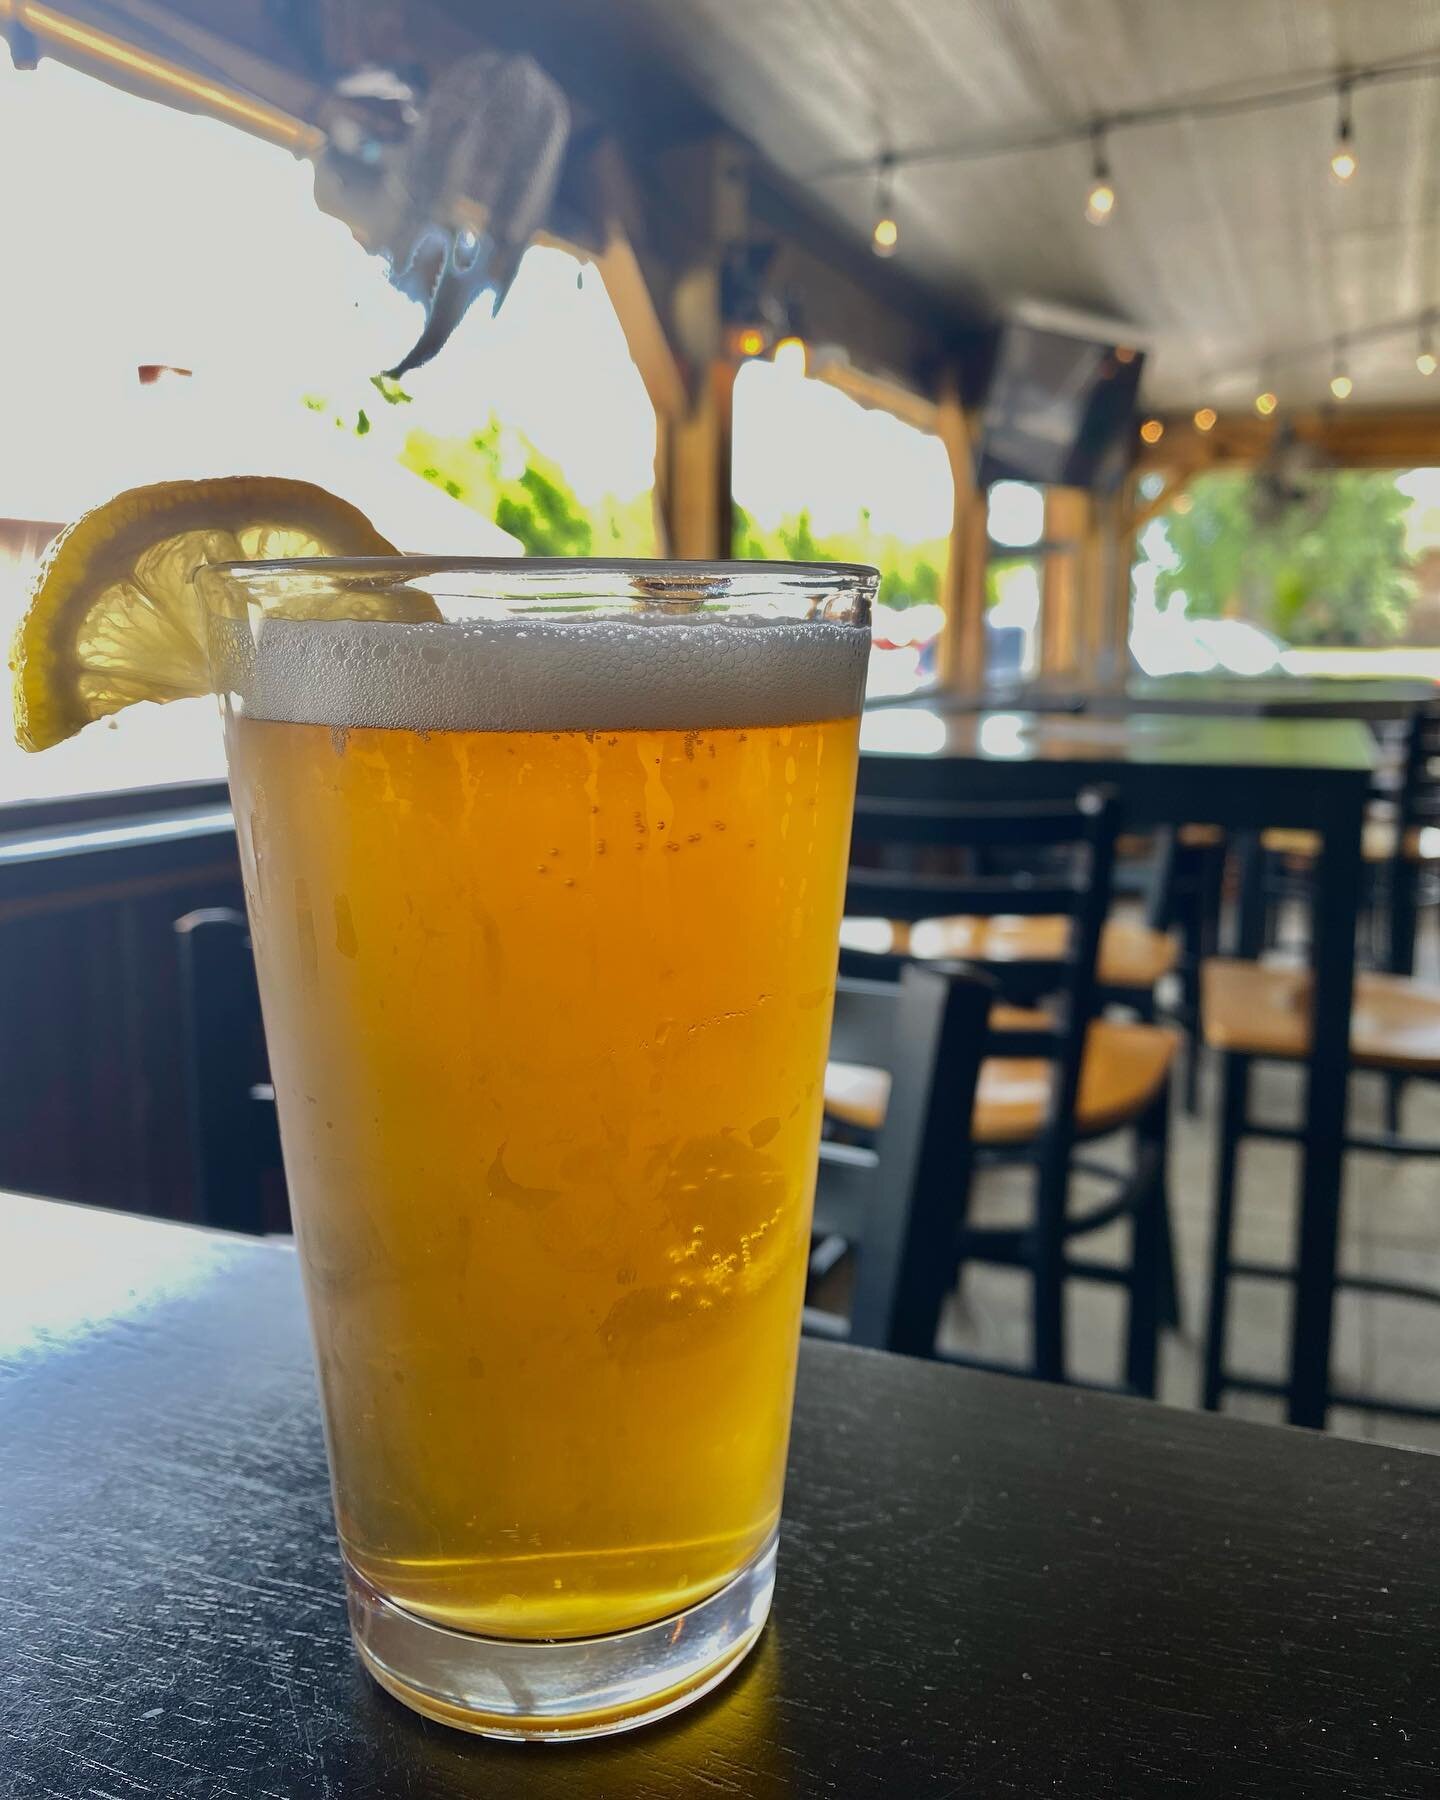 🍻 Lyman Wit is BACK 🍻

The moment you&rsquo;ve all been waiting for&hellip; our summer sipper made with fresh lemongrass and ginger is freshly tapped! 

🎶 Joe Pfeifer will be playing LIVE in the Beer Garden from 7-10 tonight 🎶 

See you here &amp